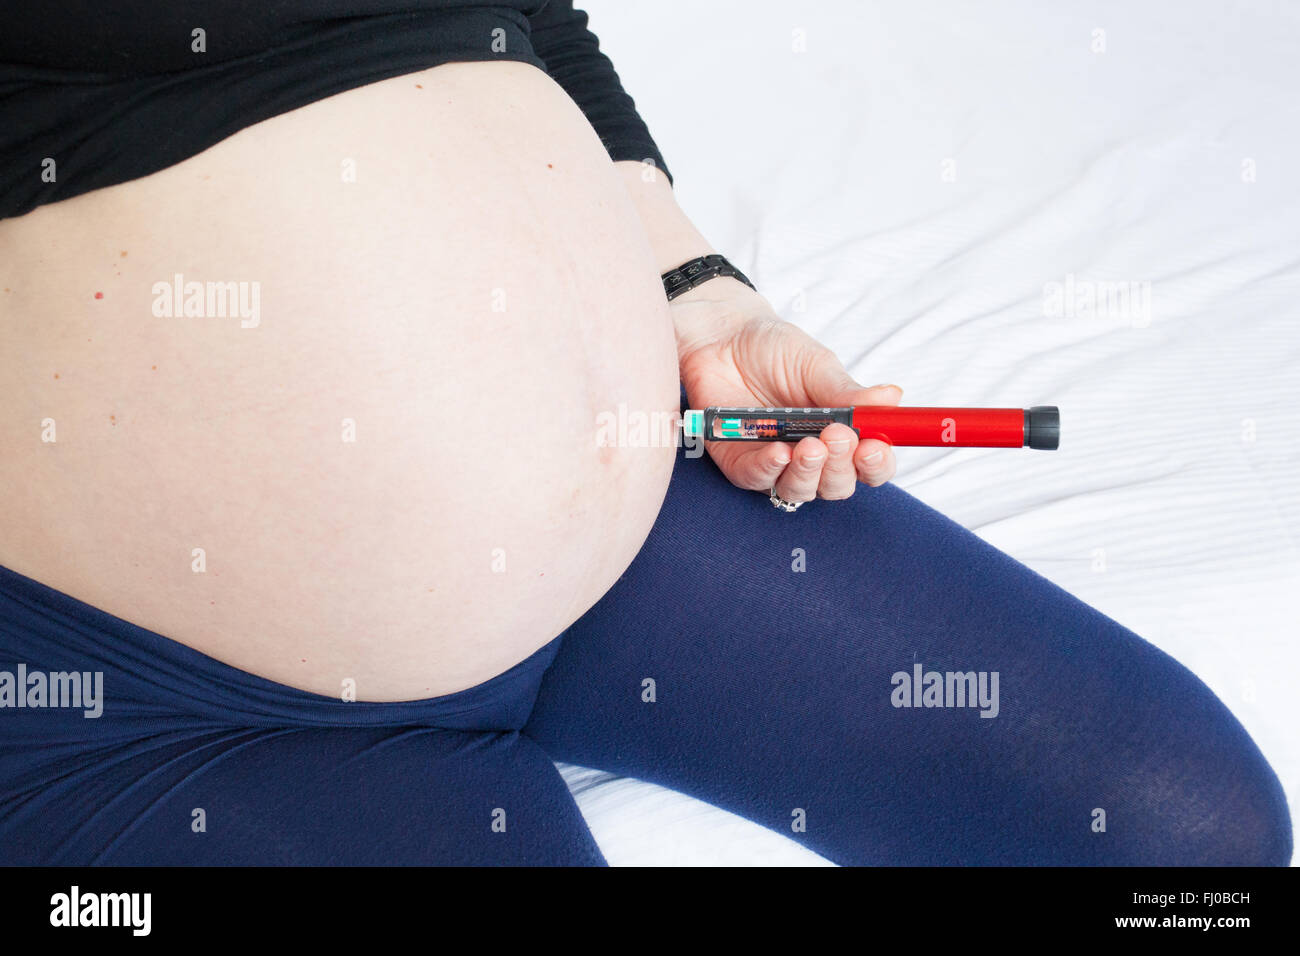 A nine month pregnant woman injects herself with the slow acting background insulin Levemir to control her Type 1 diabetes. Stock Photo